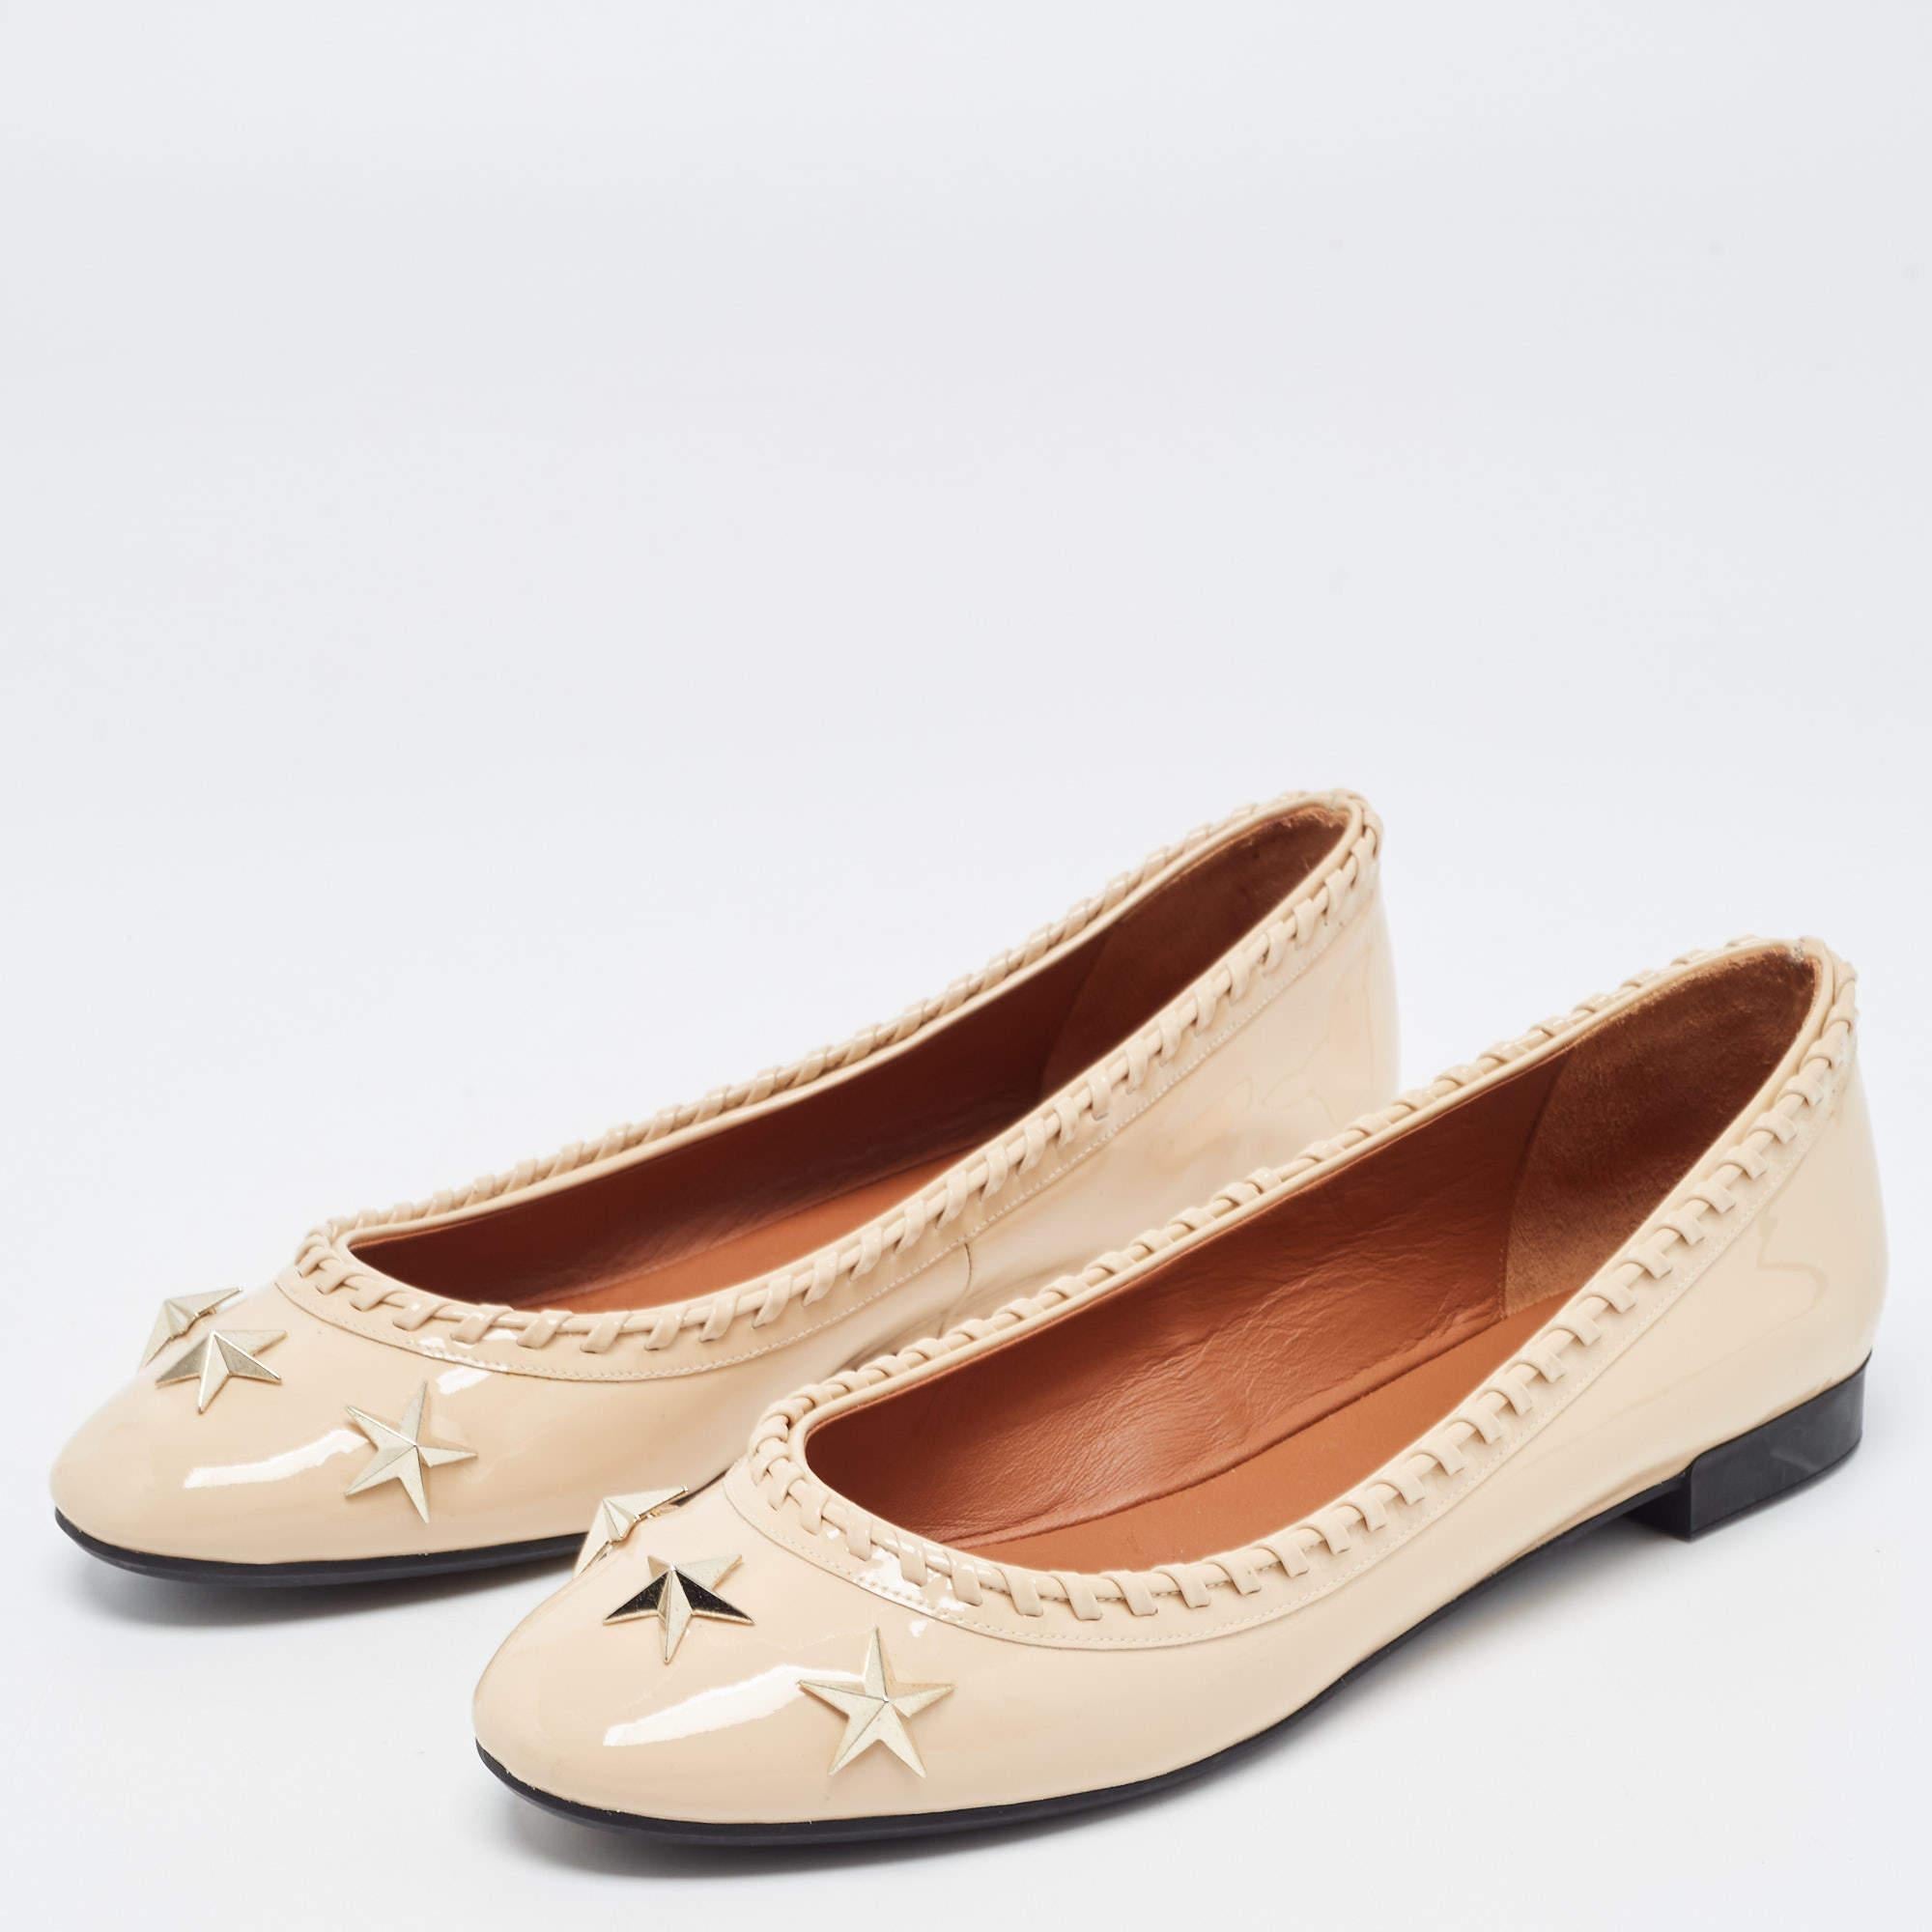 Givenchy Beige Patent Whipstitch Detail Star Studded Ballet Flats Size 39.5 3